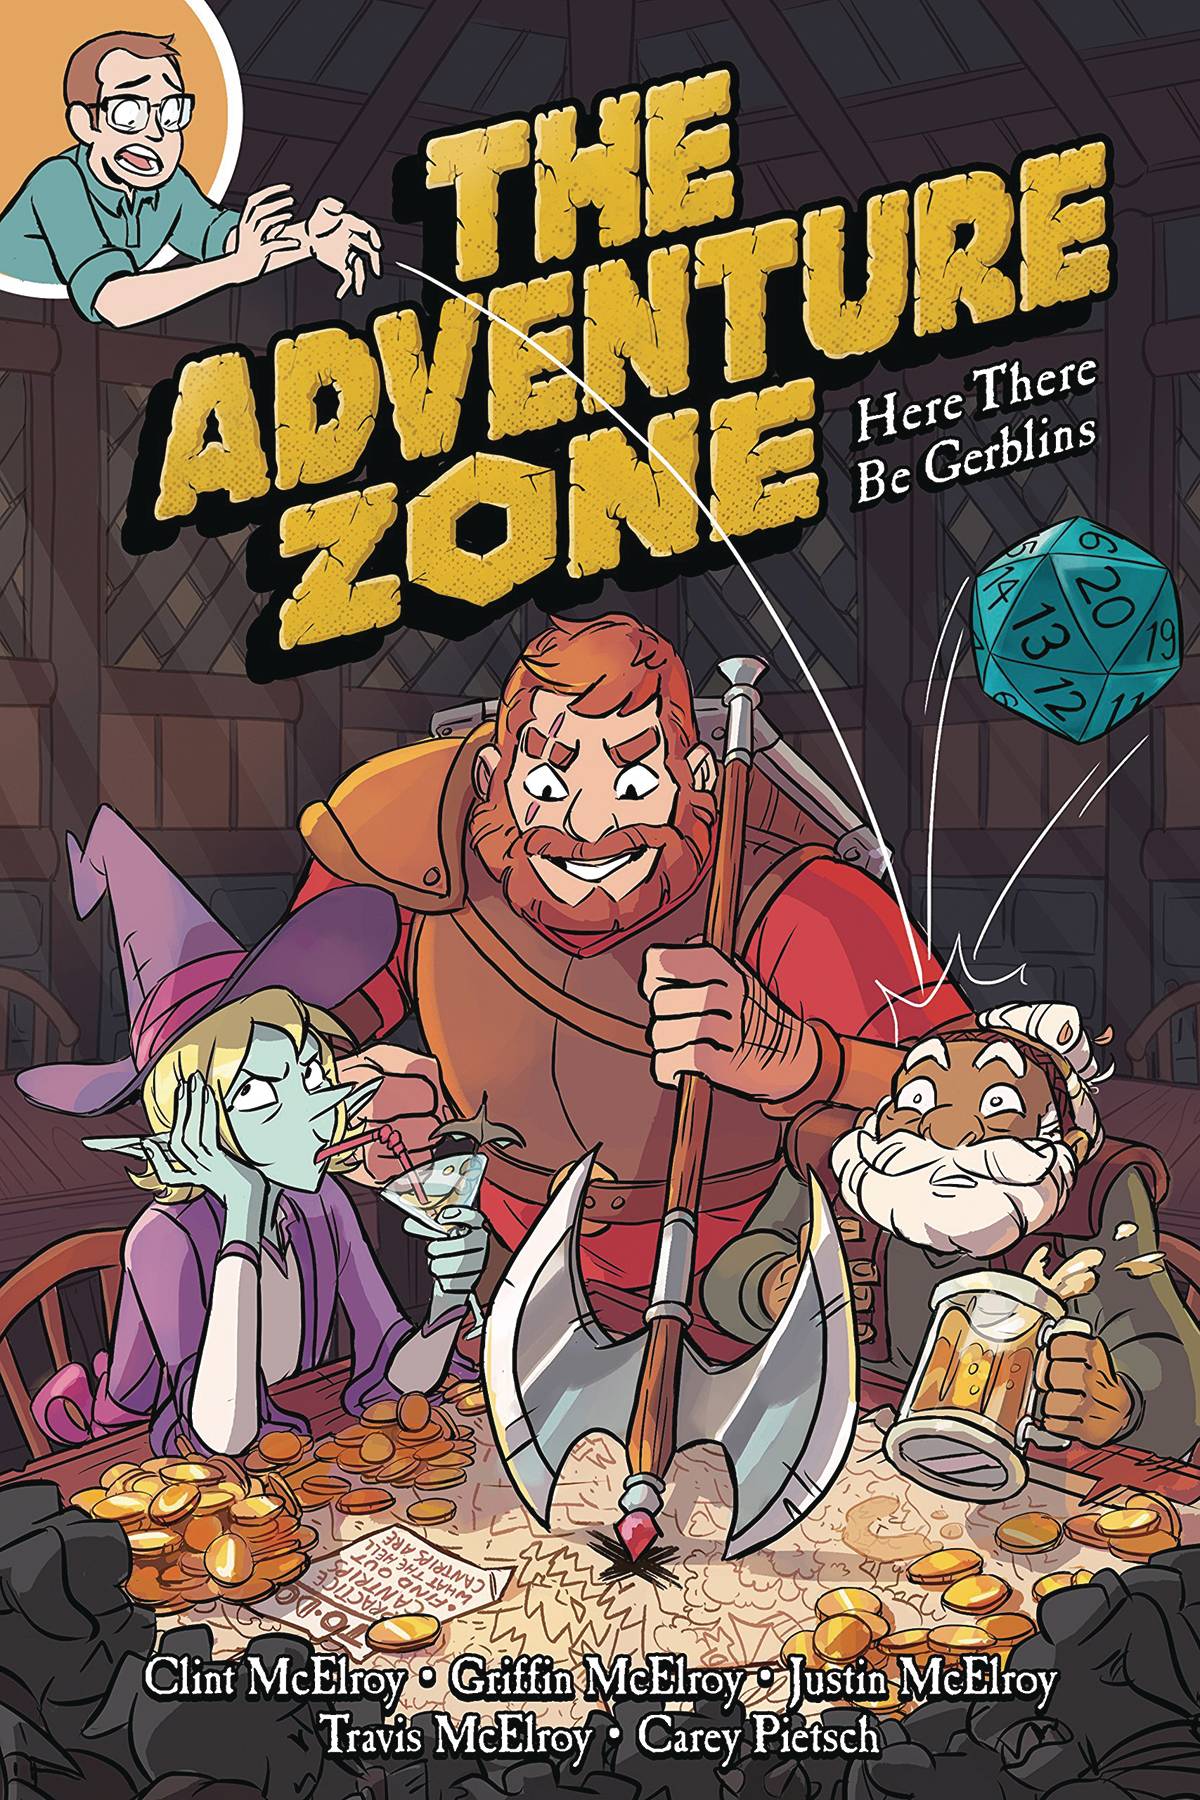 Adventure Zone Vol. 01 Here There Be Gerblins